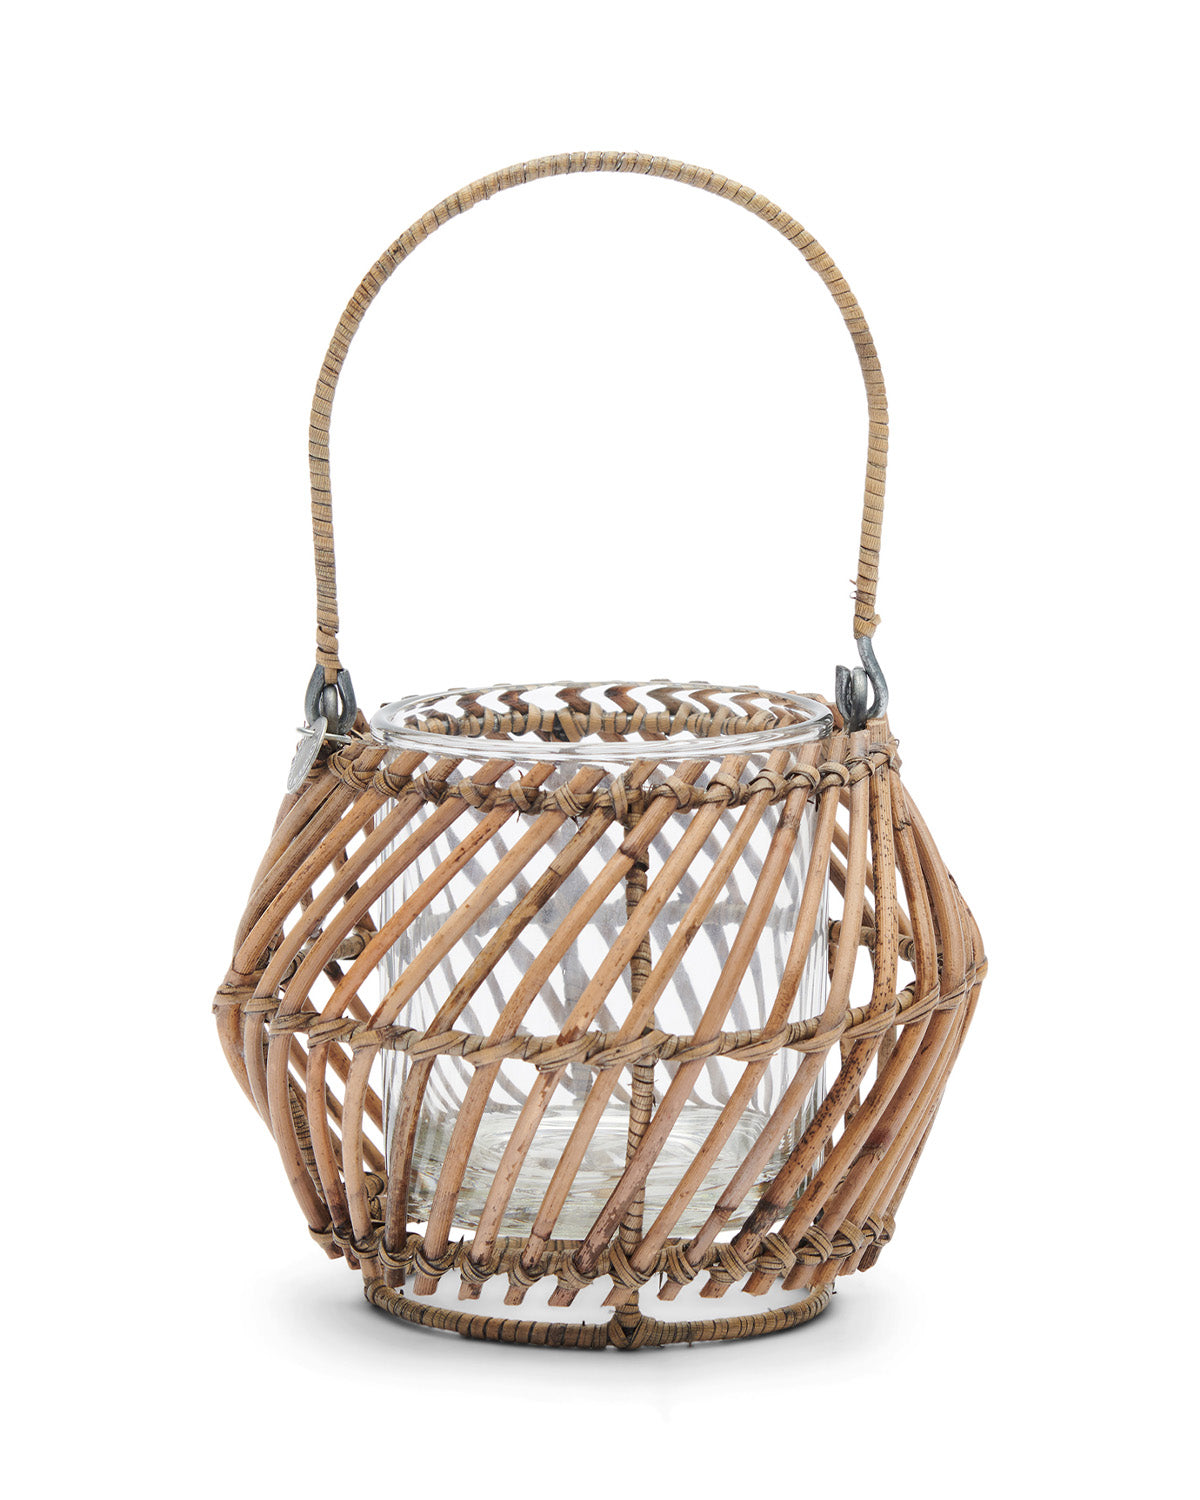 Tealight holder of sturdy glass immersed in a hand-crafted rattan basket by Riviera Maison